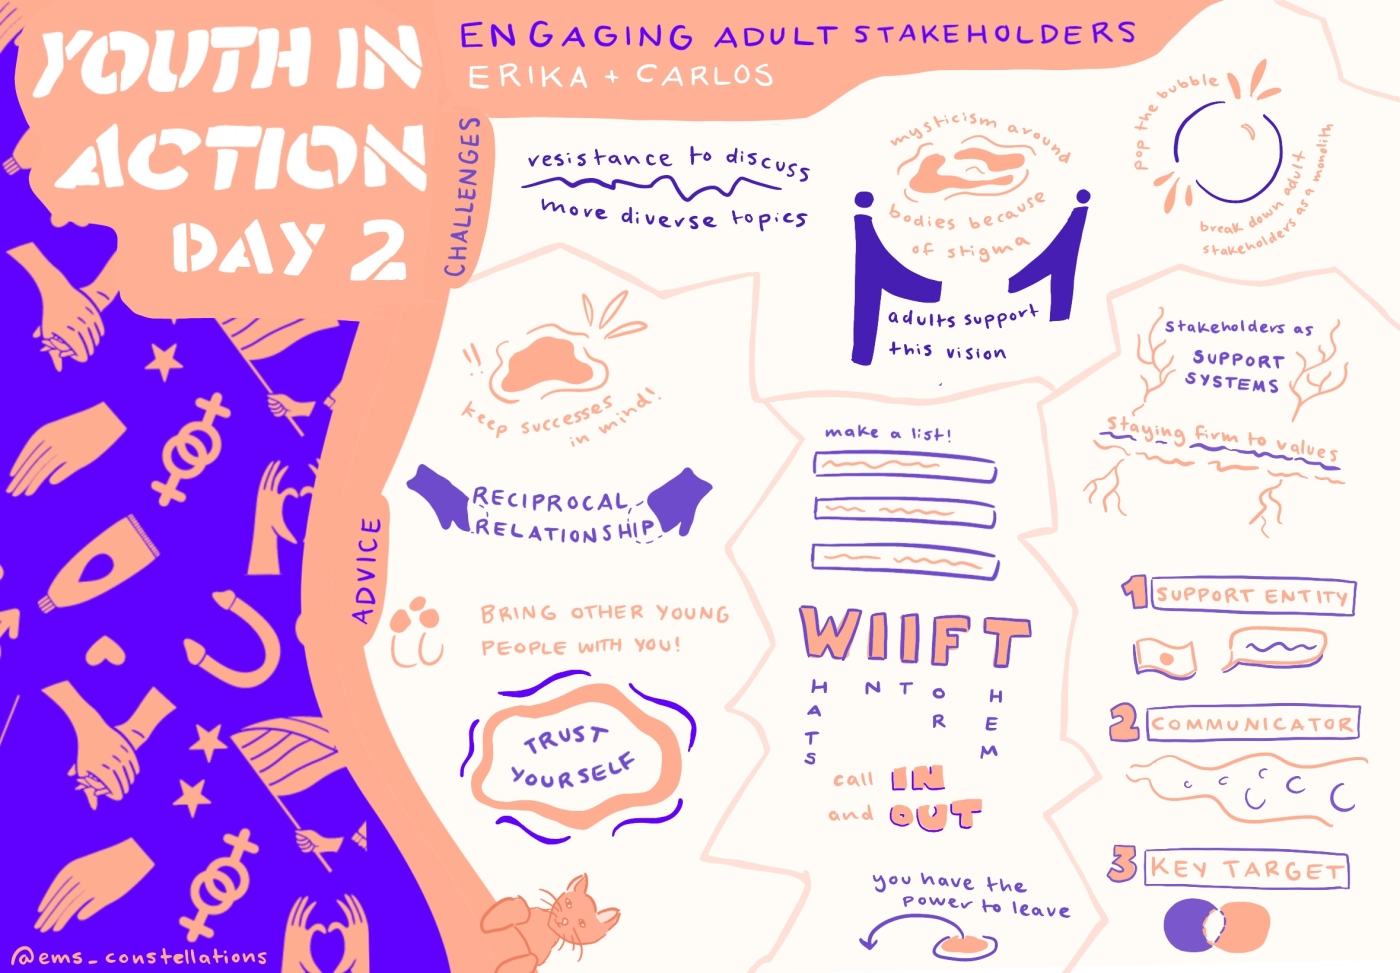 Visual brainstorm for Youth in Action Day 2, Engaging Adult Stakeholders. Purple and orange writing and doodles outline advice and challenges such as communication, support systems, and trusting yourself.